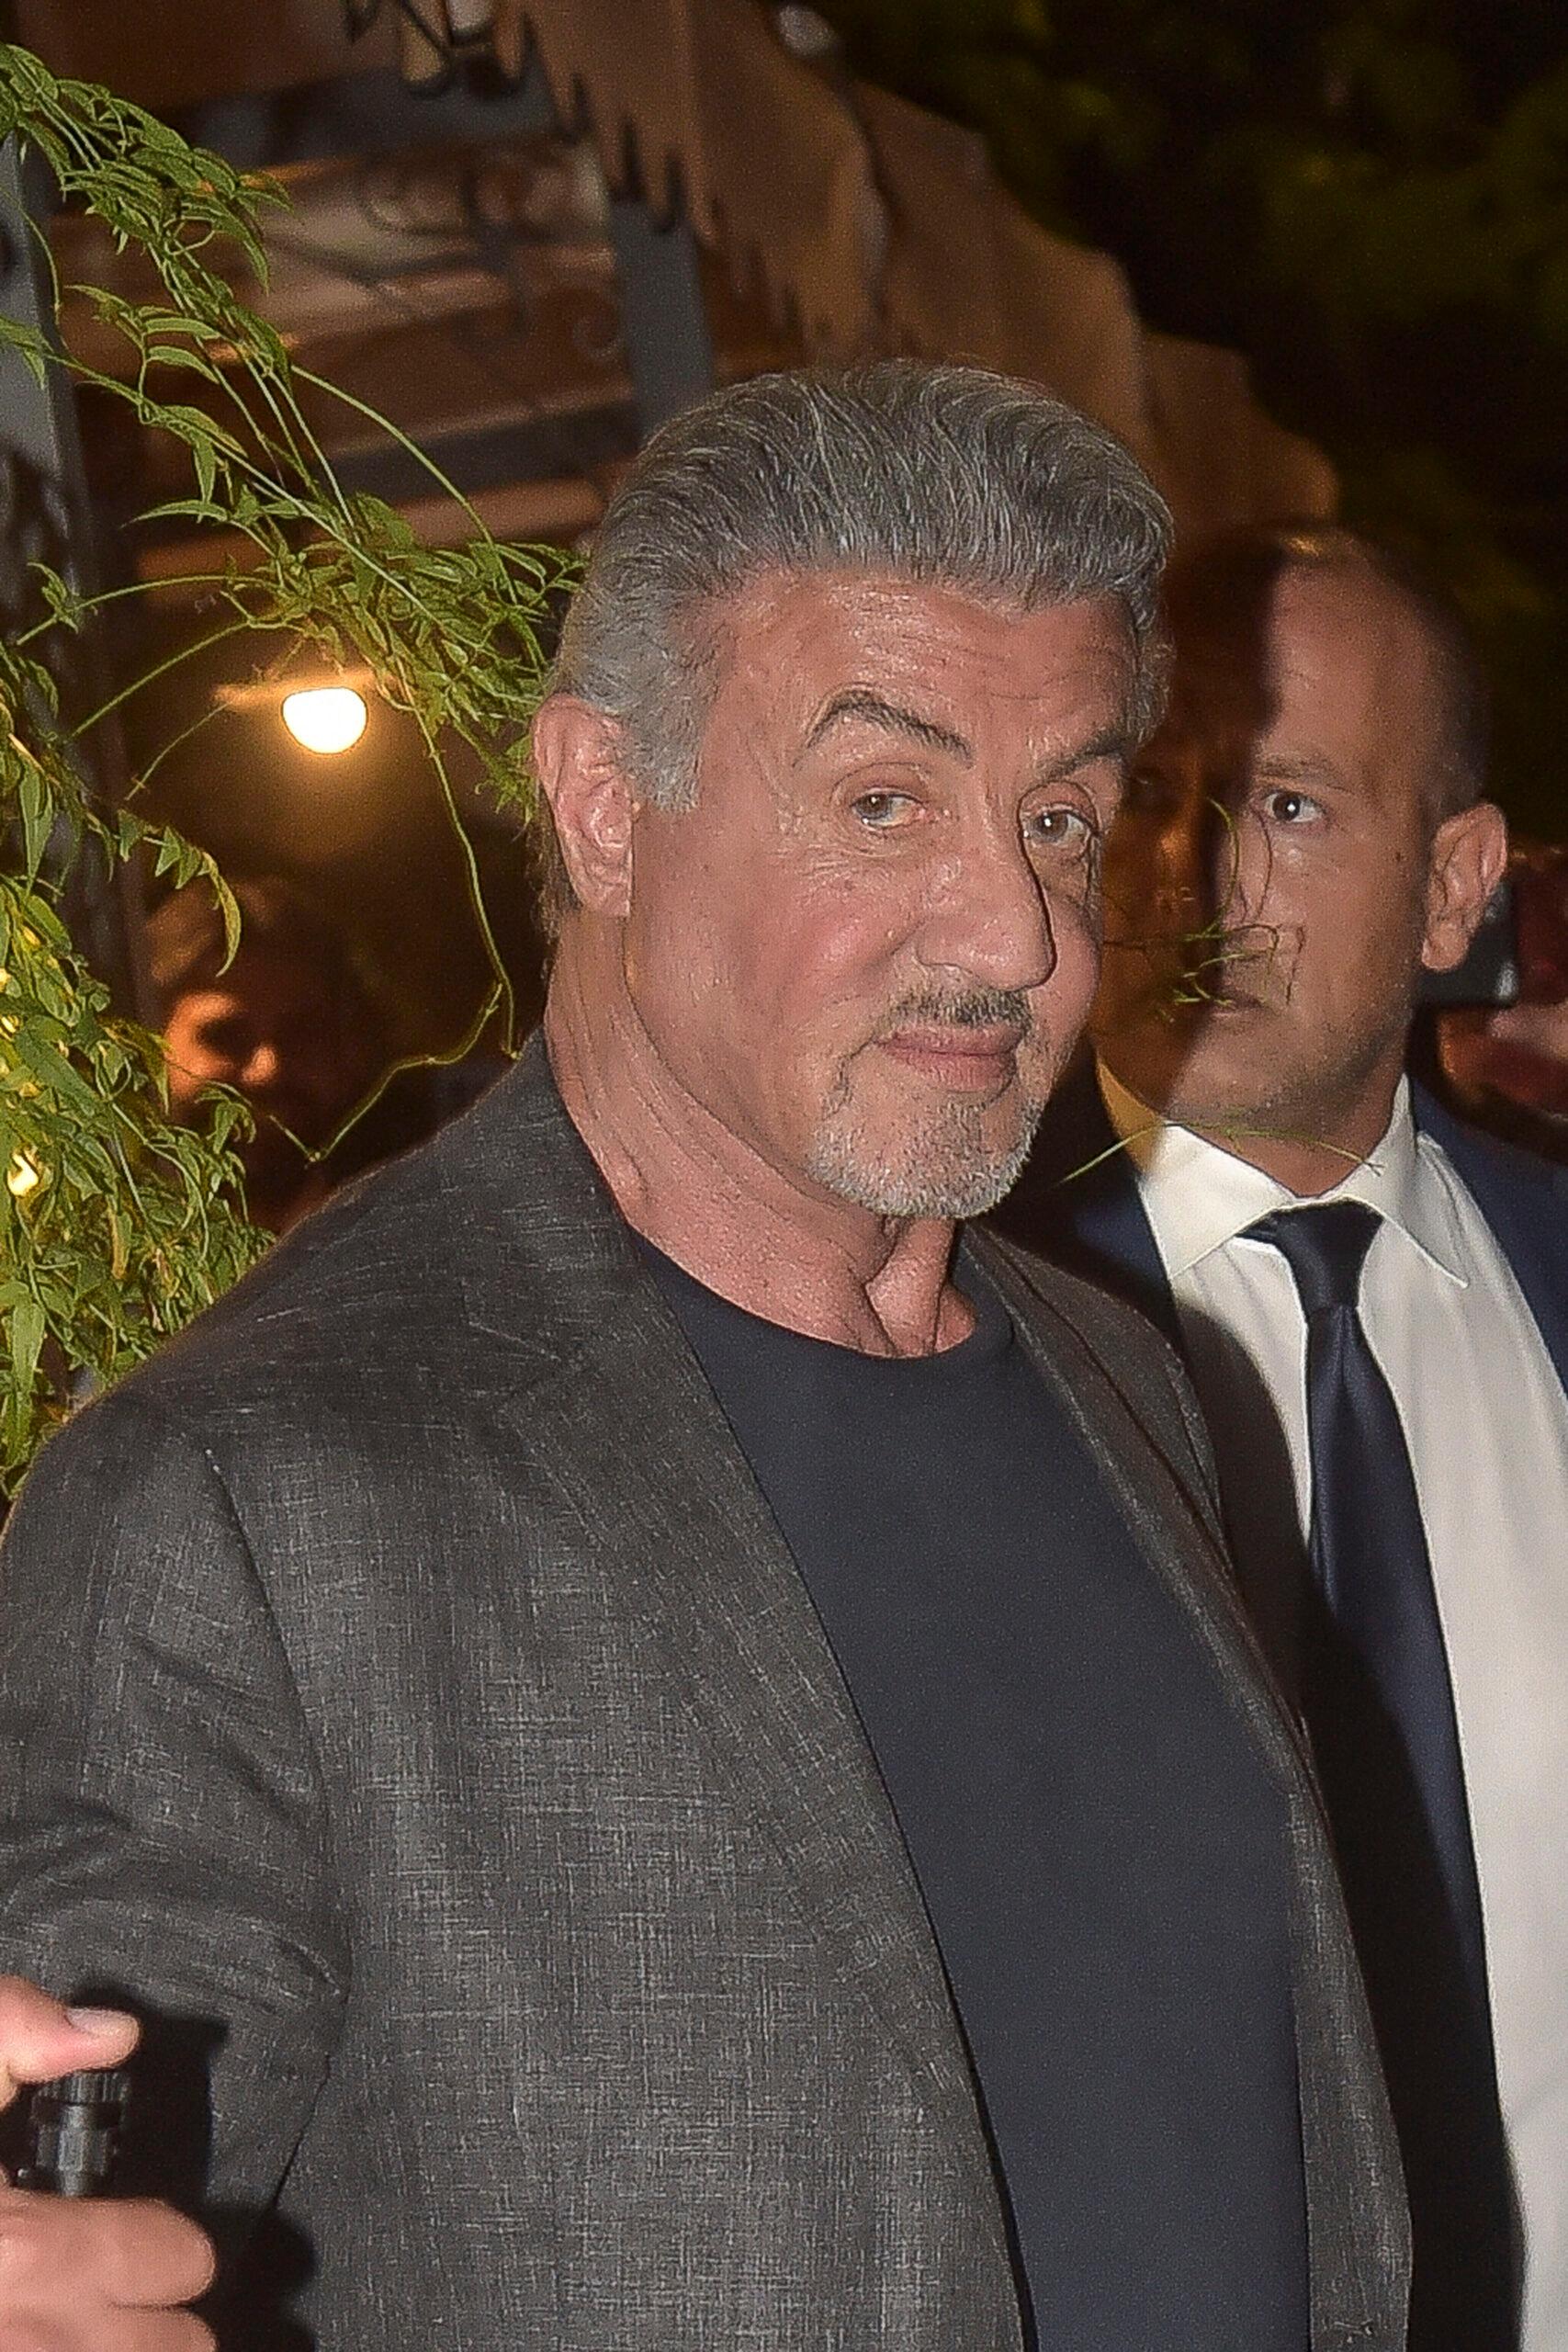 Sylvester Stallone, in Rome to promote a Netflix Serie, is spotted leaveing the restaurant "Rinaldi al Quirinale" with a few friends. 12 Sep 2022 Pictured: Sylvester Stallone. Photo credit: MEGA TheMegaAgency.com +1 888 505 6342 (Mega Agency TagID: MEGA895353_001.jpg) [Photo via Mega Agency]